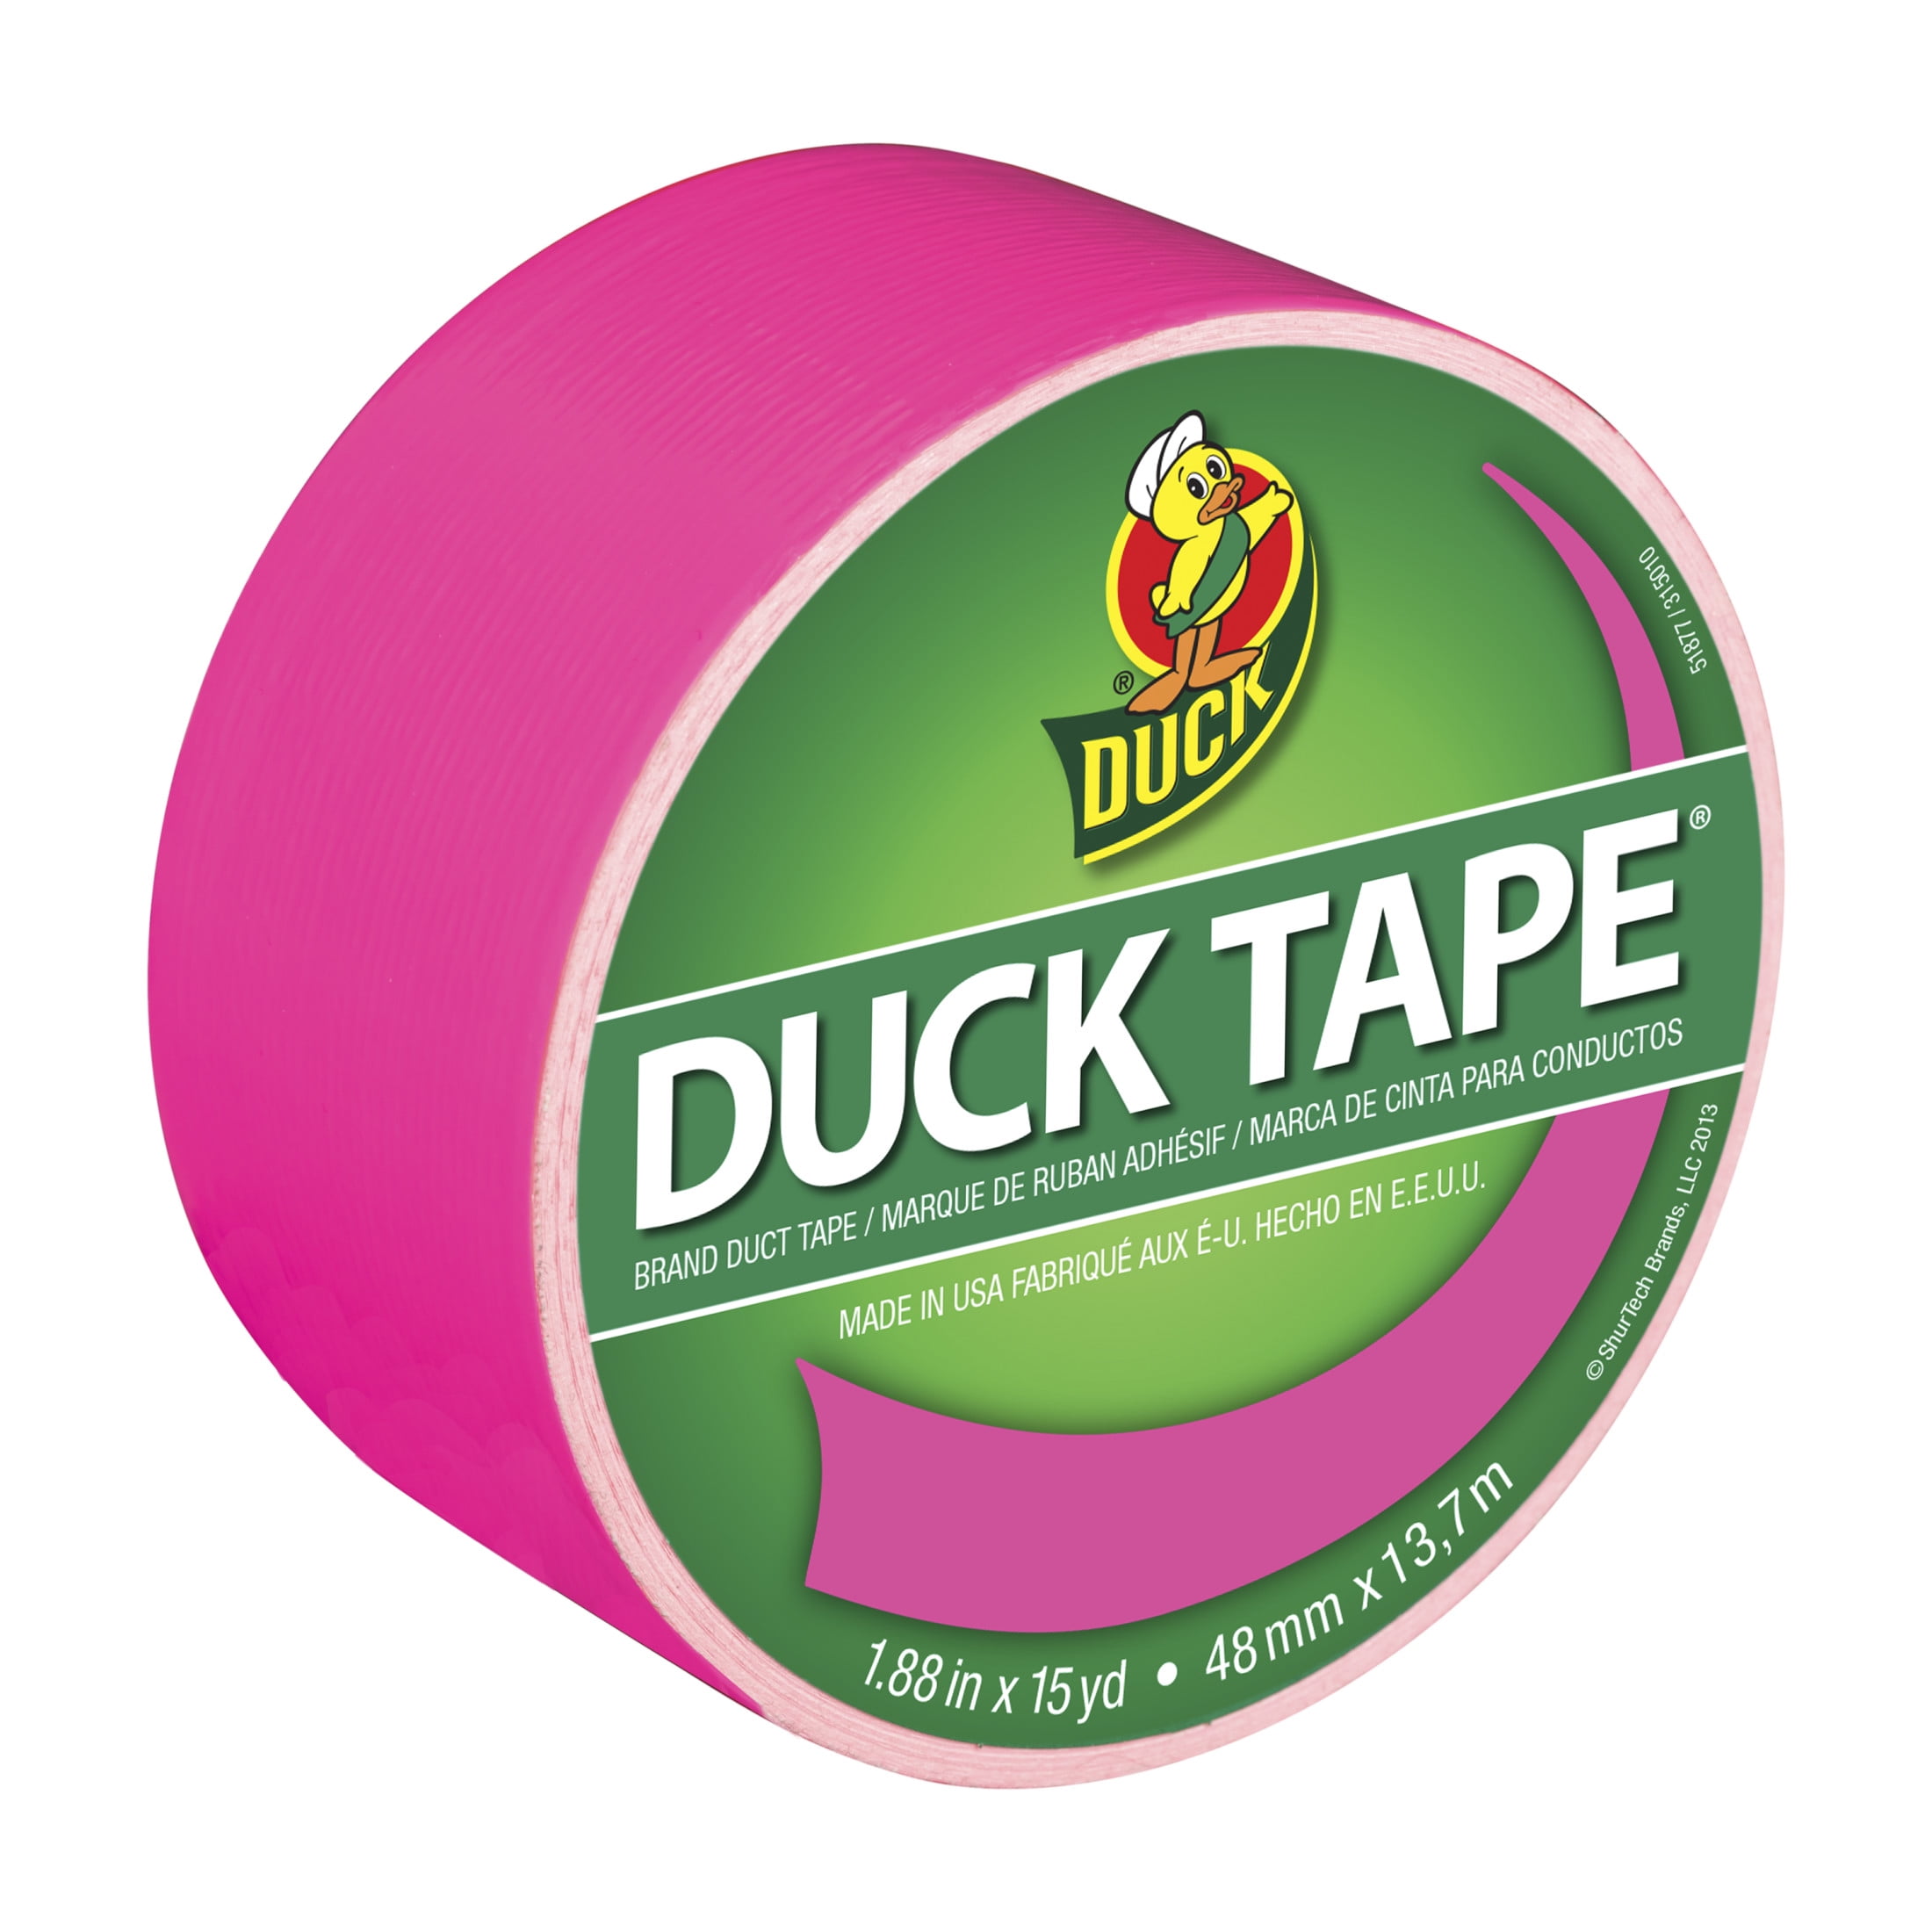 Shield Pink Duct Tape, 2 x 60 Yds, 9 Mil